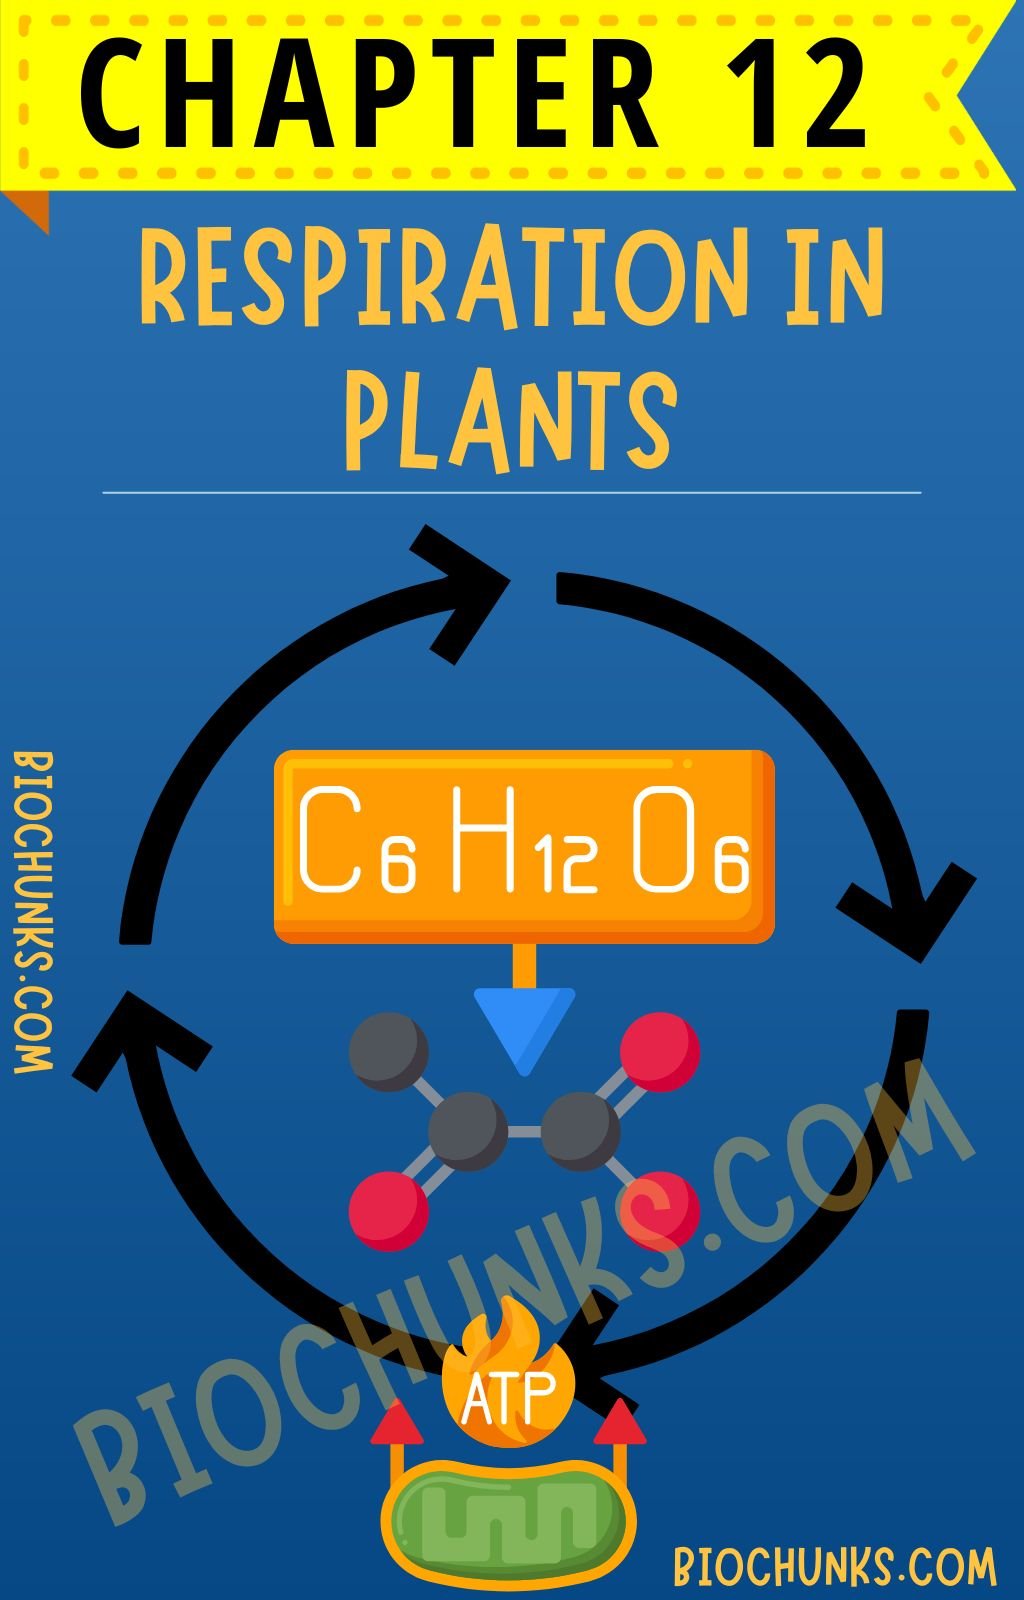 Respiration in Plants Chapter 12 Class 11th biochunks.com